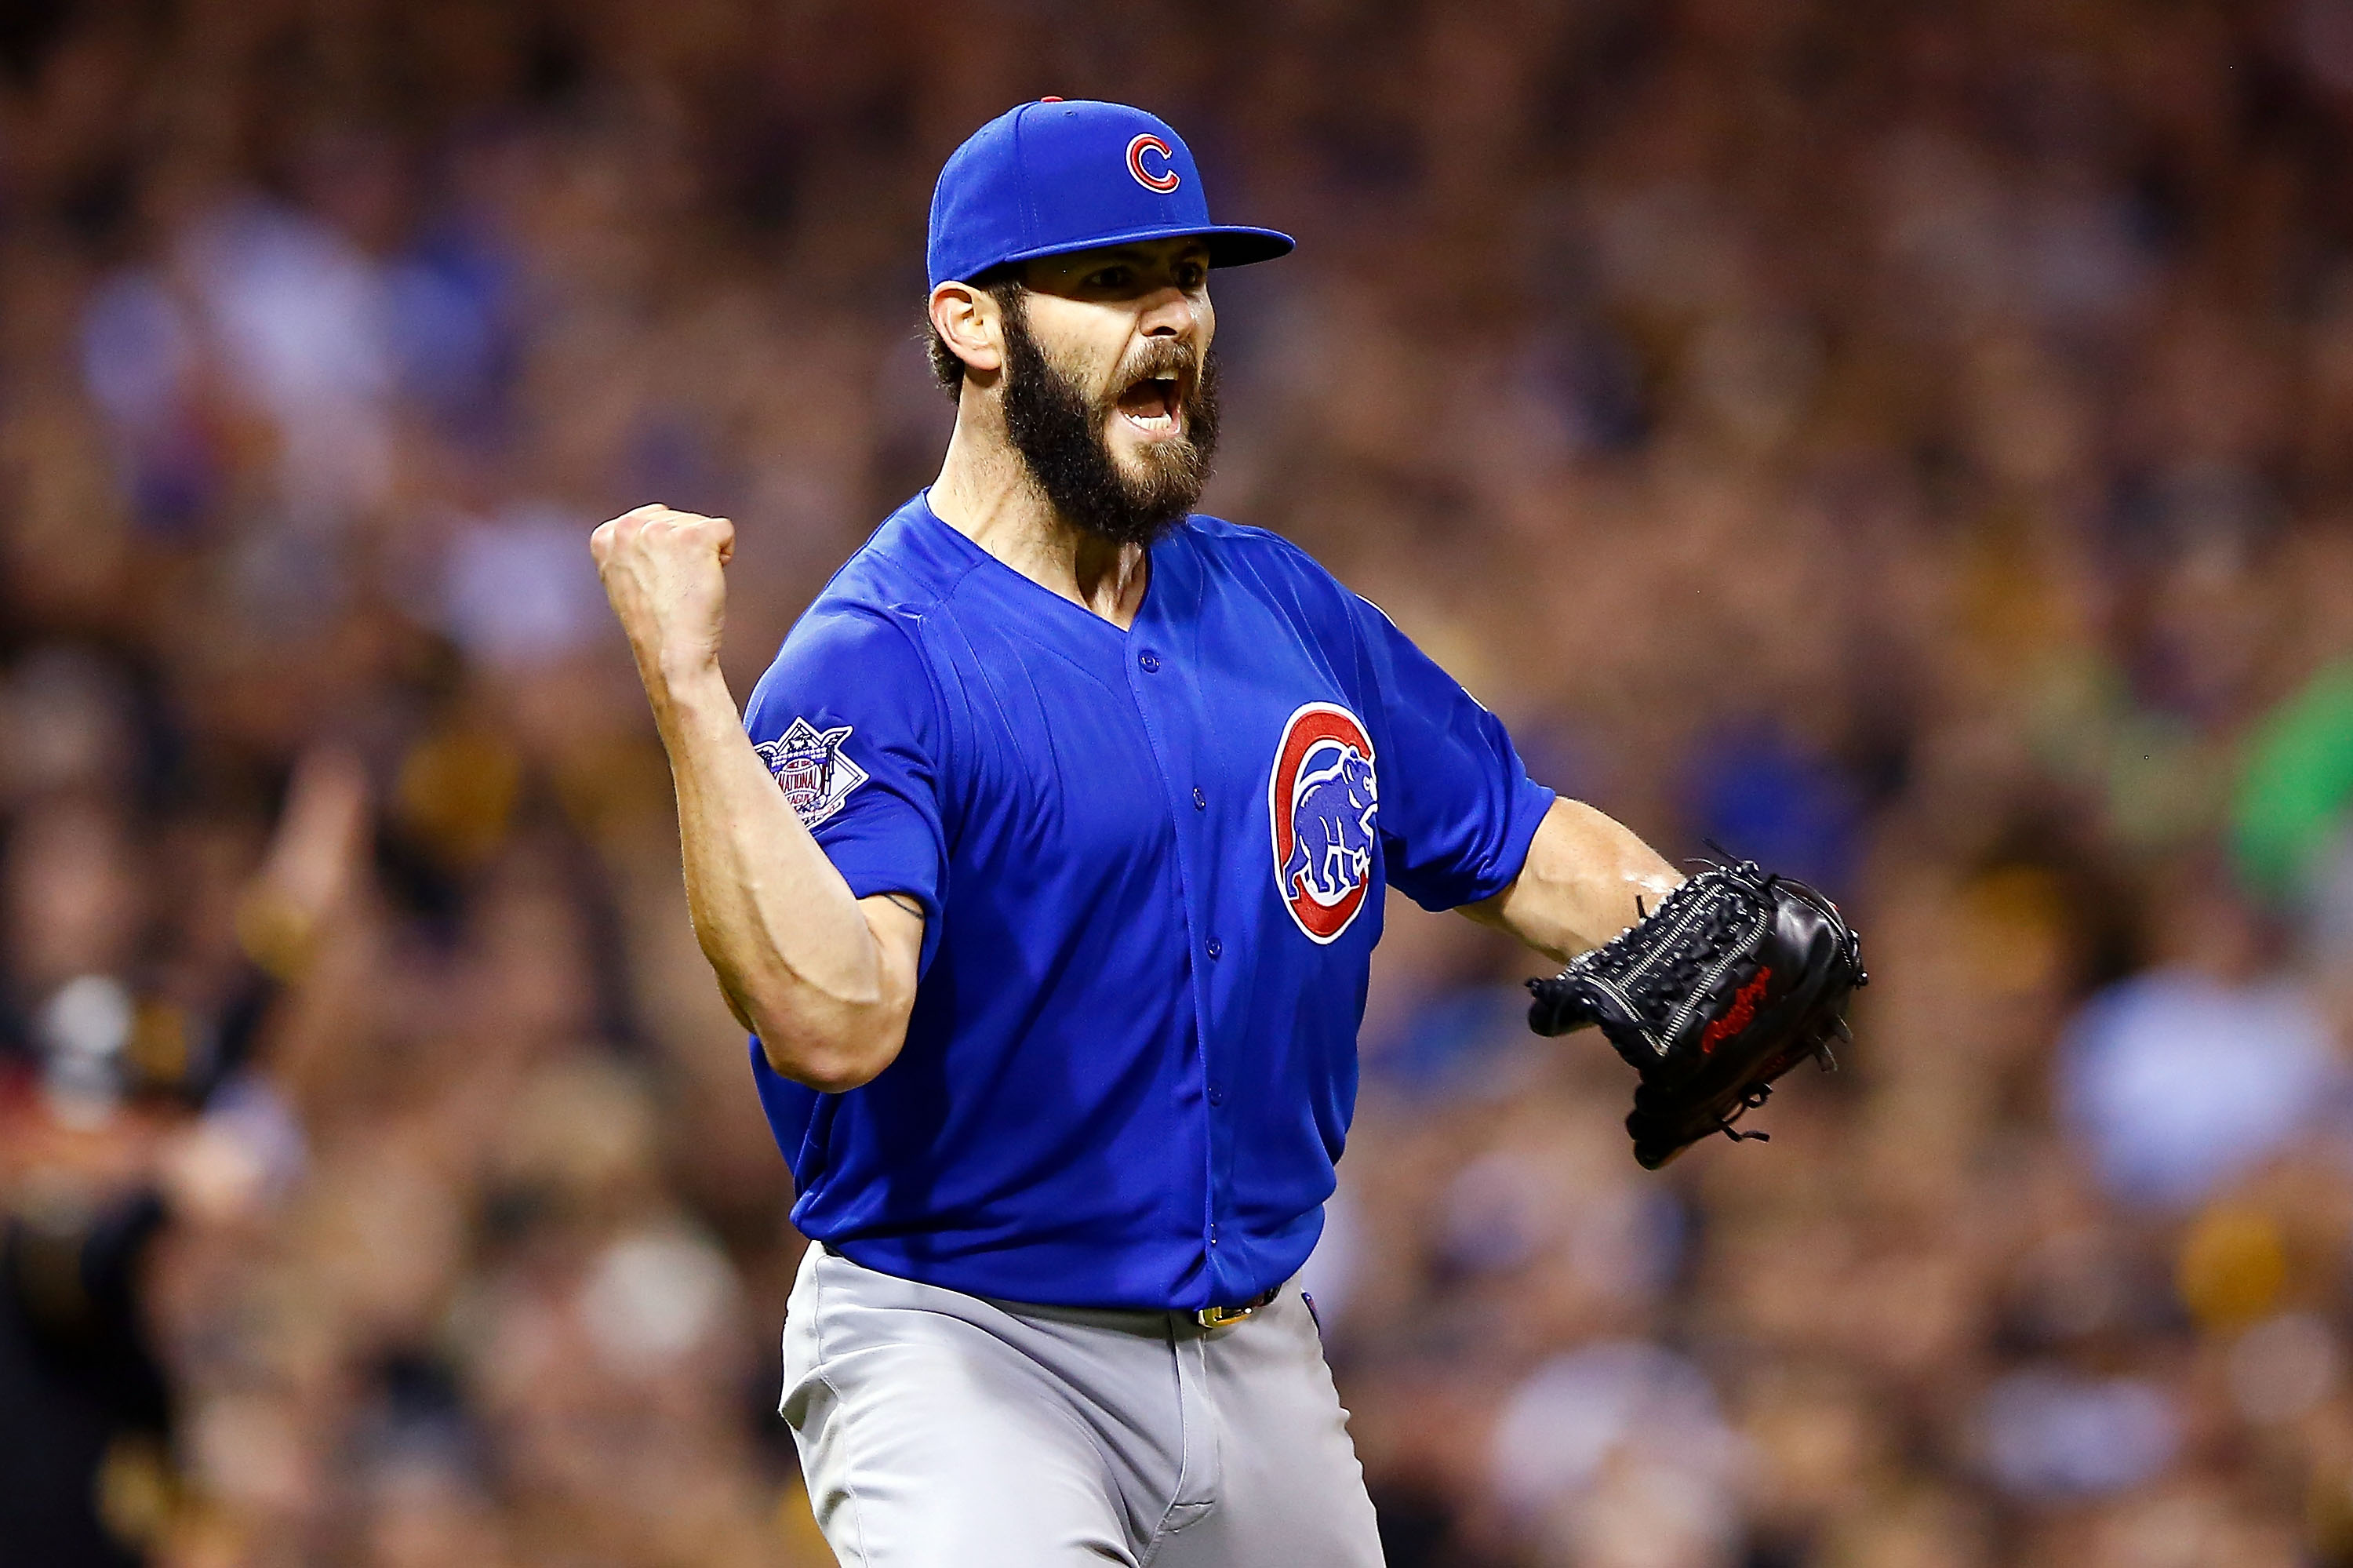 Crazy Stats Show Just How Dominant Cubs Pitcher Jake Arrieta Has Been